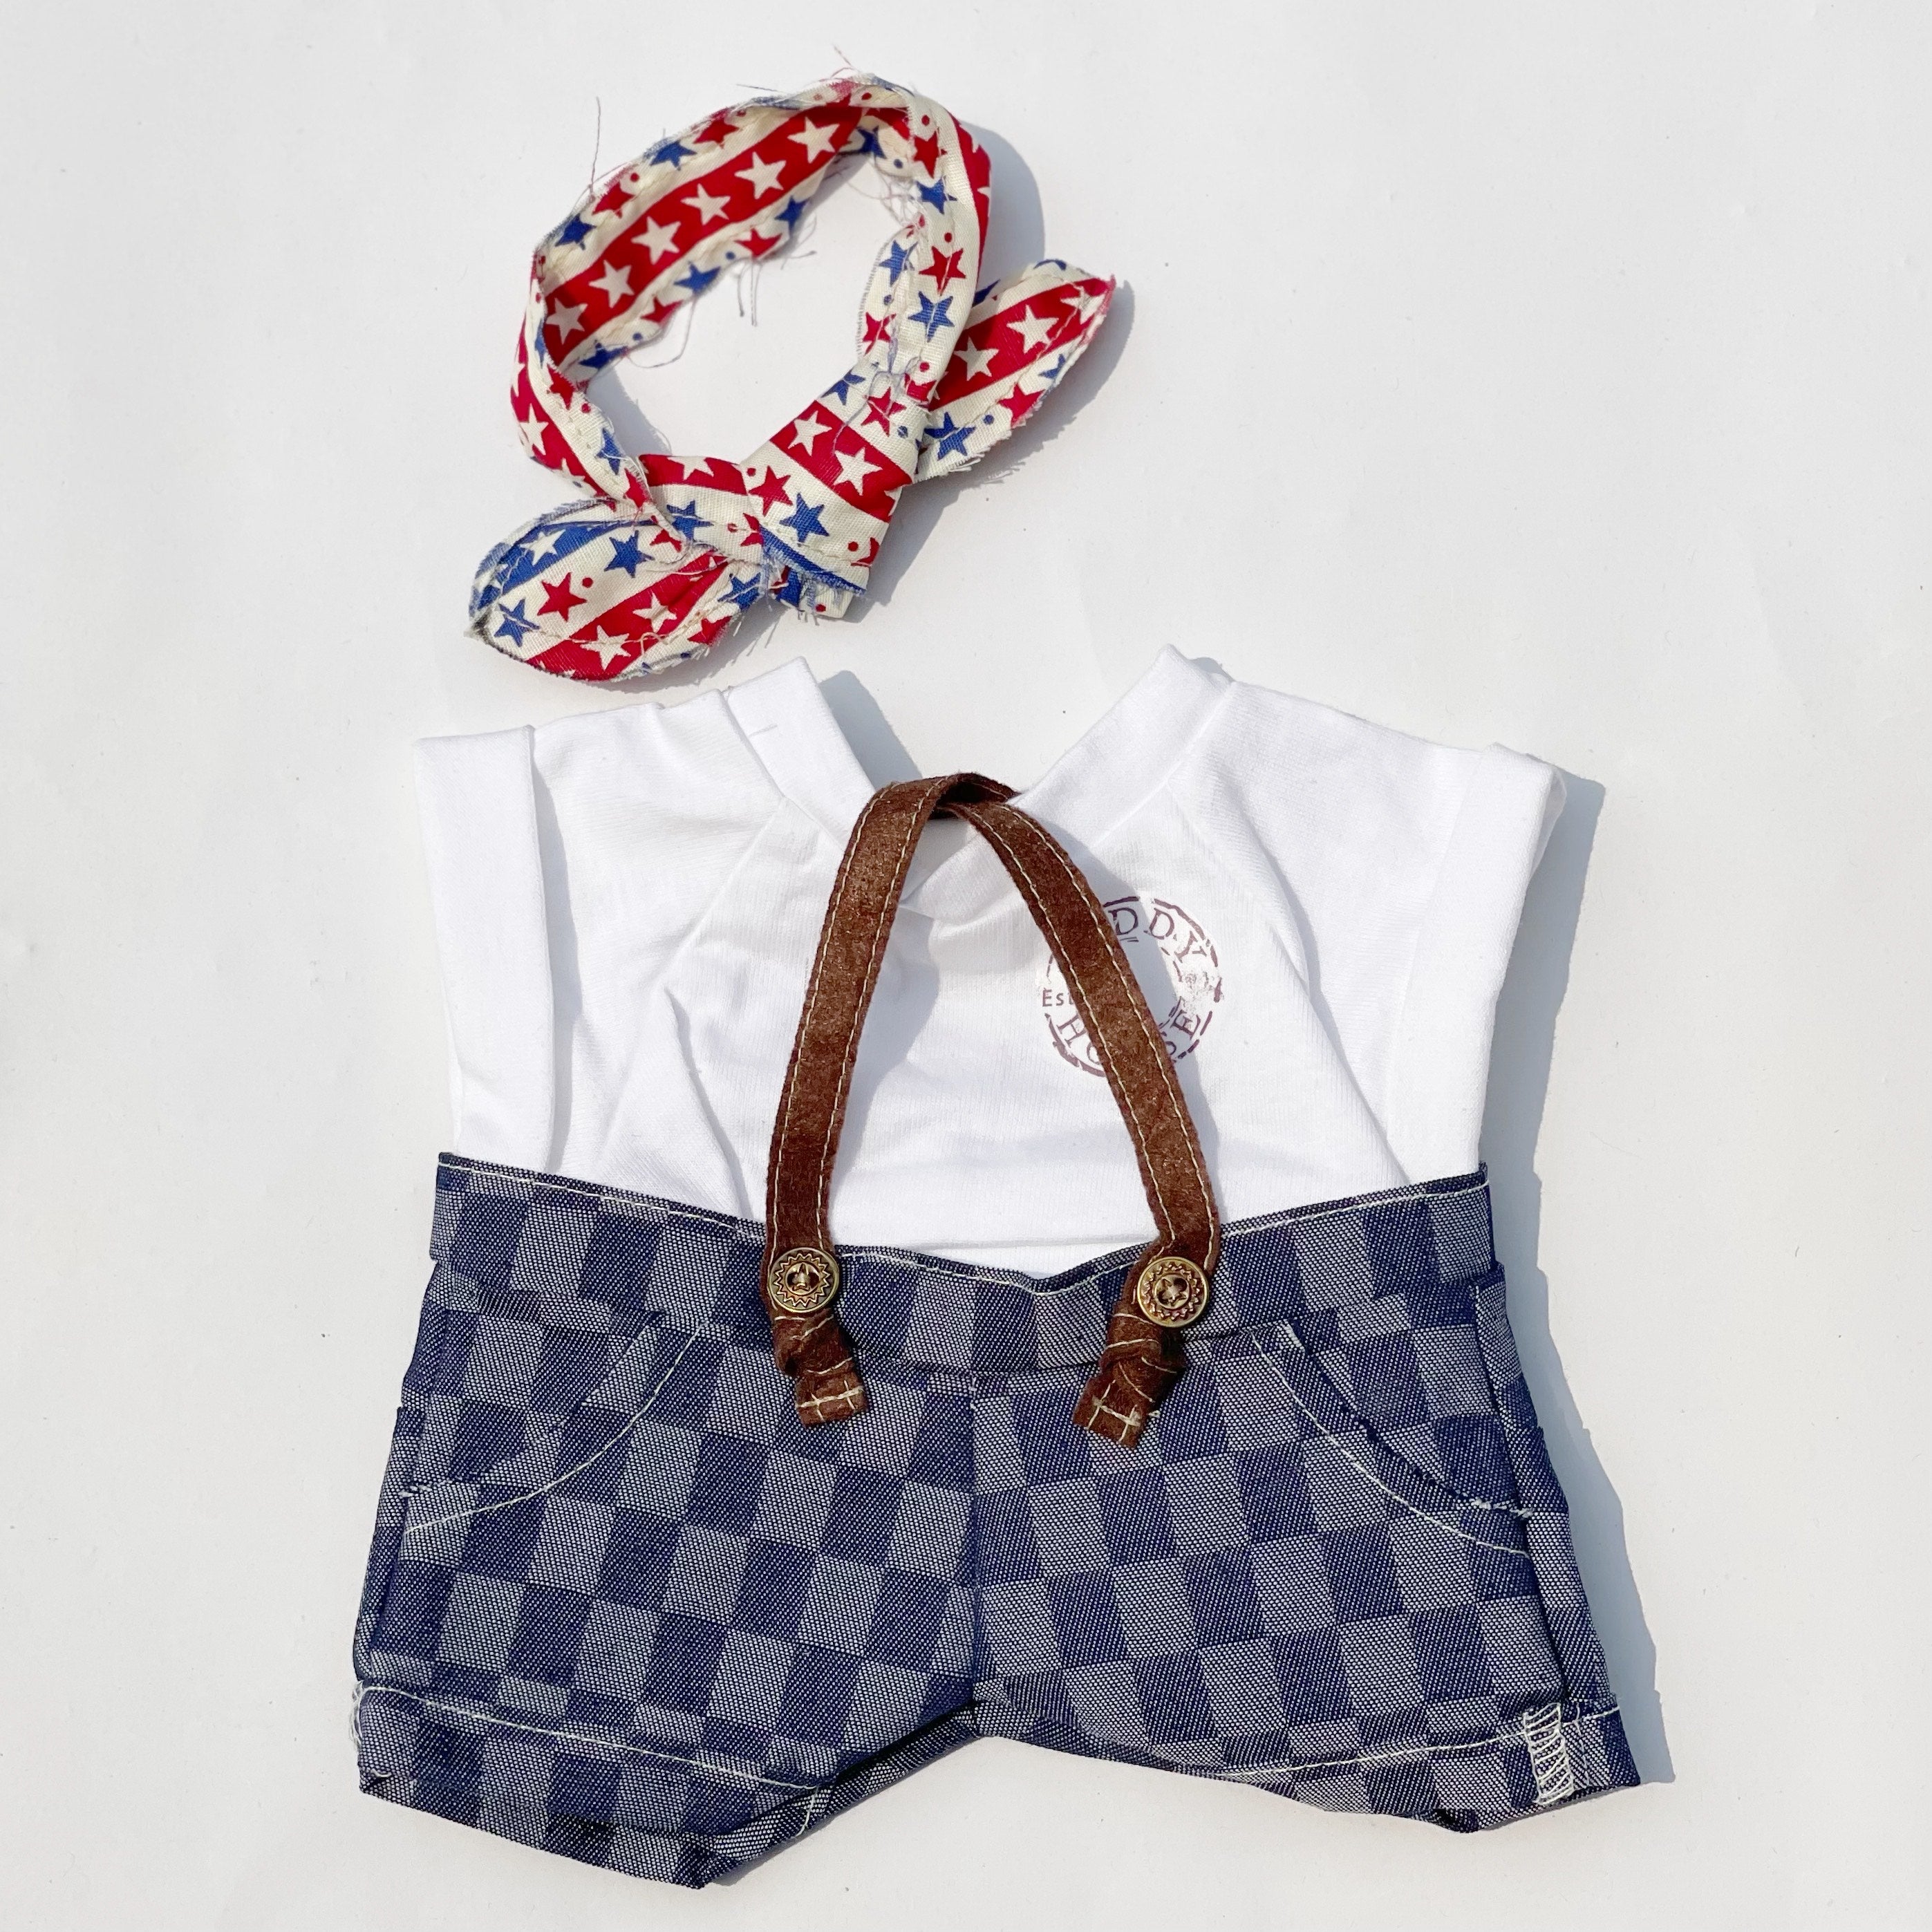 DUNGAREES W/ T-SHIRT 22" - 31" TEDDY IN COUNTRY